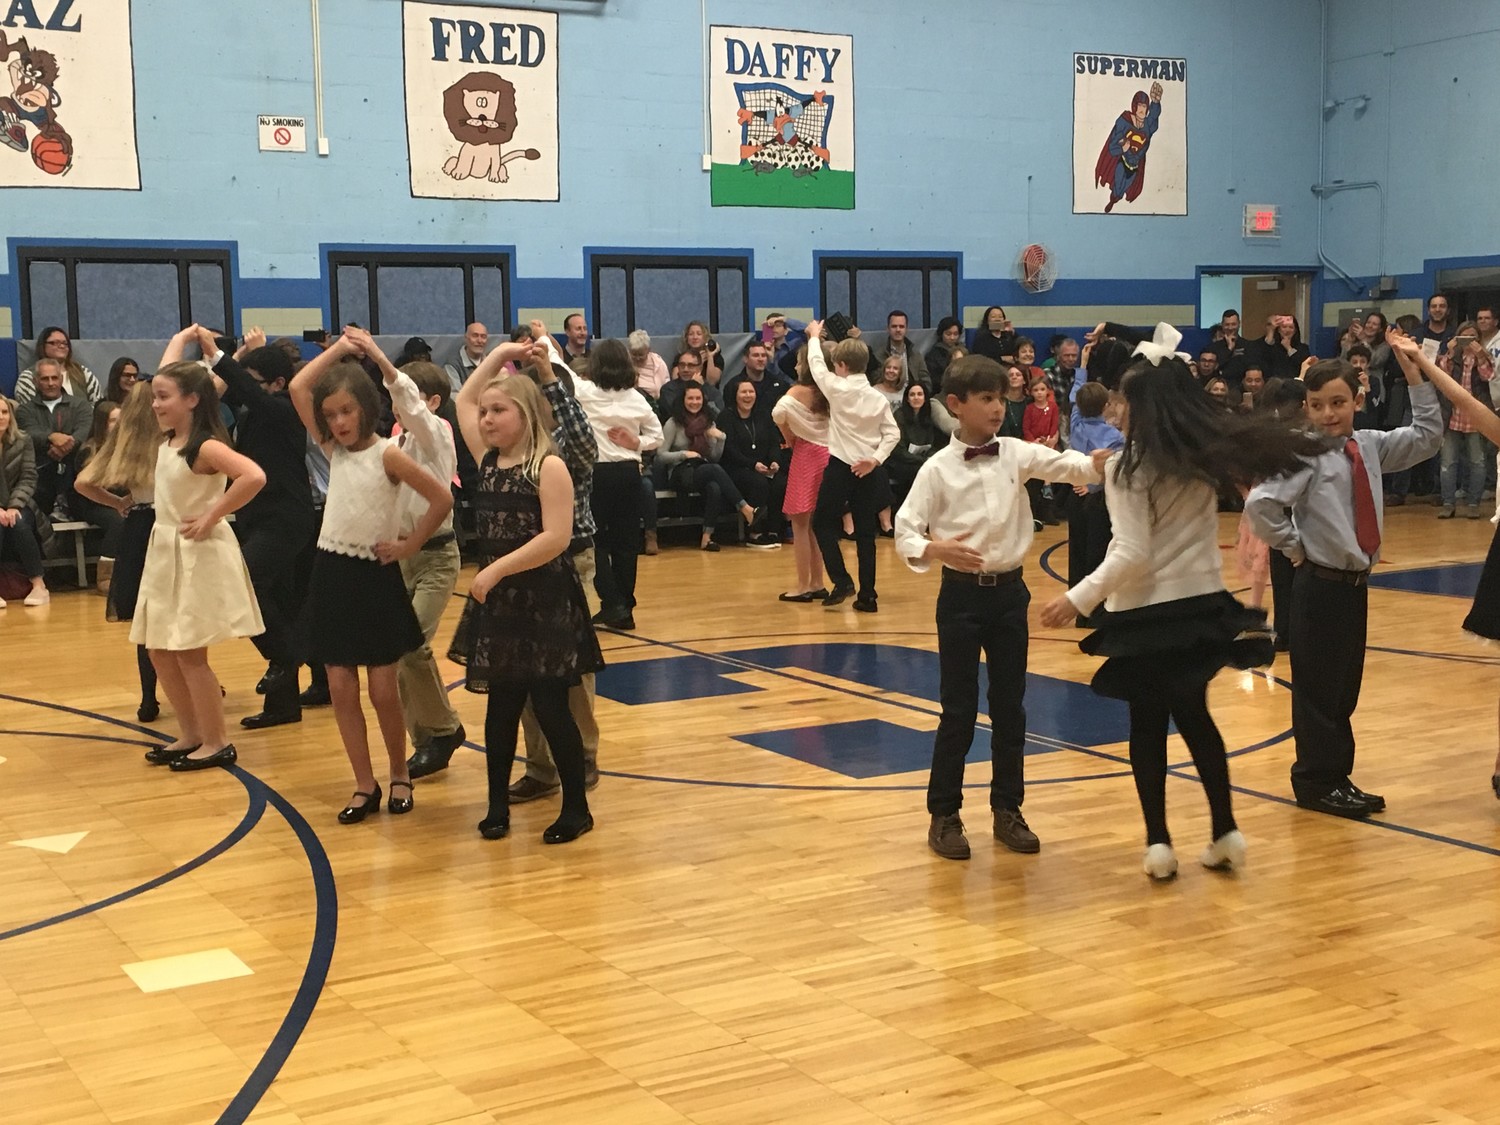 William S. Covert Elementary School students danced the merengue during the culmination of a 10-week ballroom dance training program.